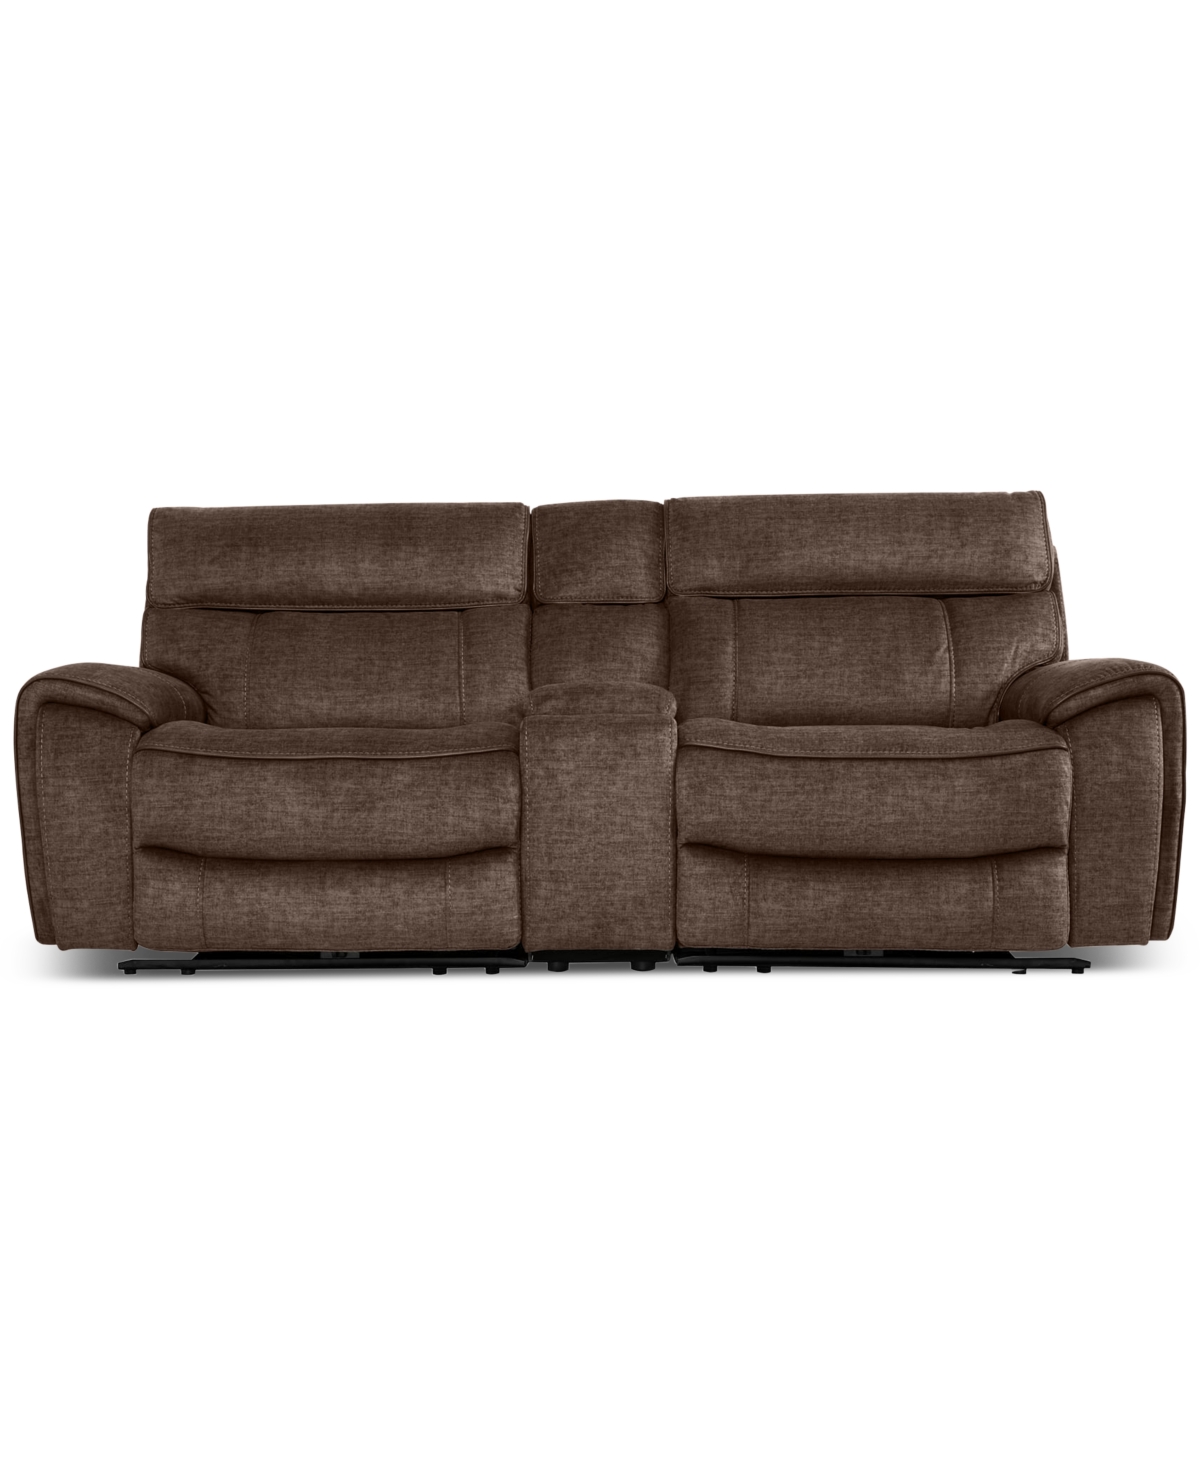 Furniture Hutchenson 3-pc. Fabric Sectional With 2 Power Recliners, Power Headrests And Console In Chocolate Brown